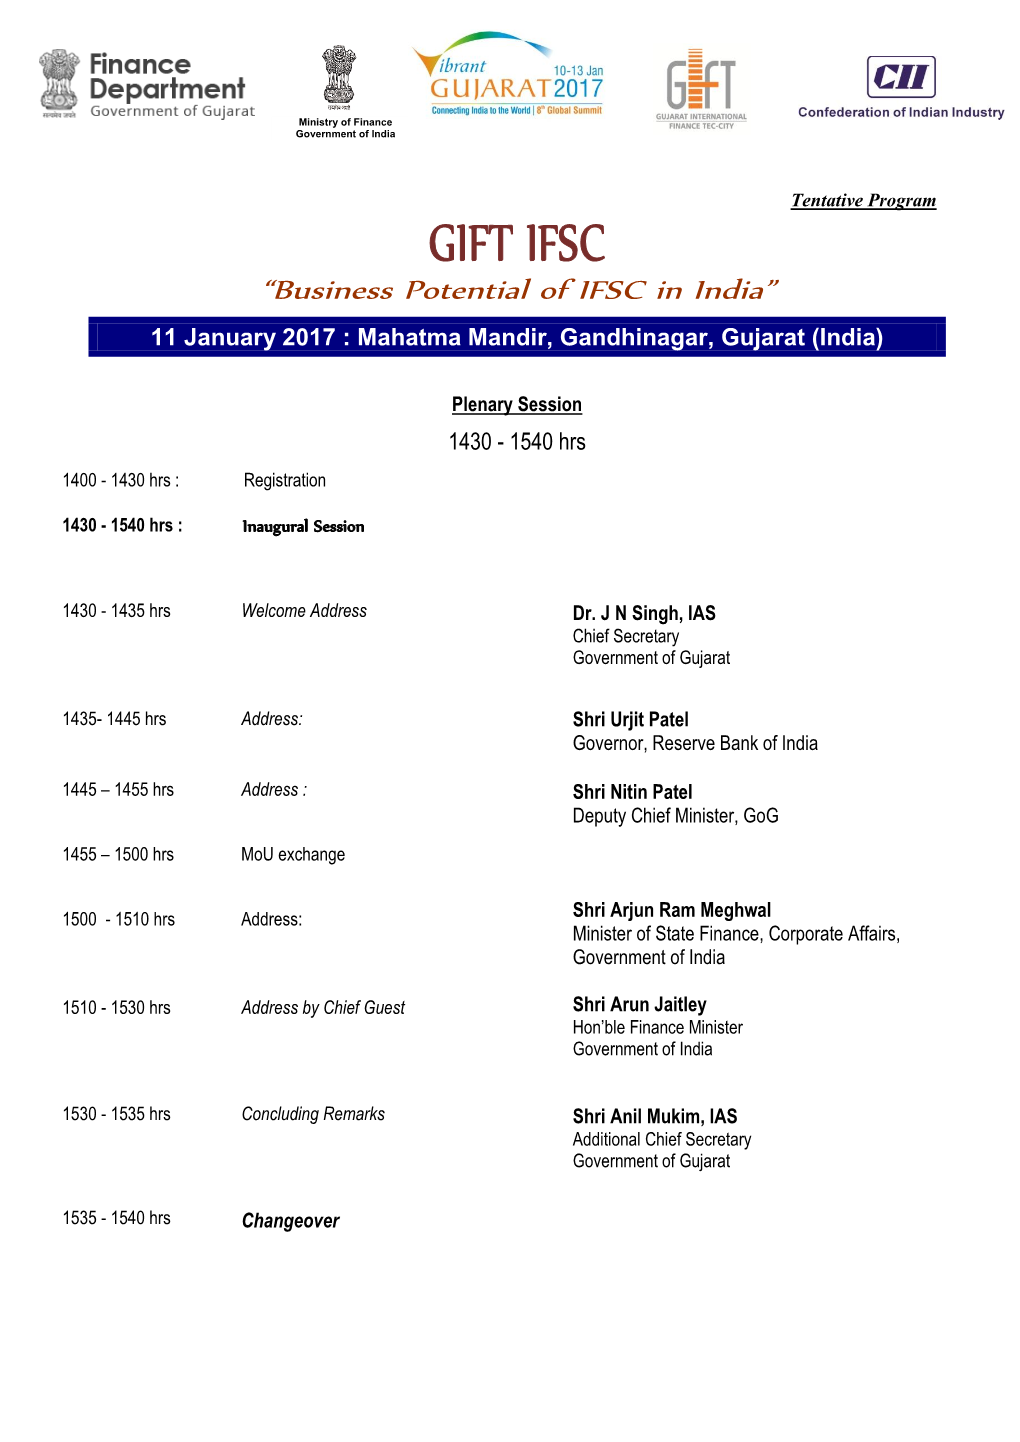 GIFT IFSC “Business Potential of IFSC in India”